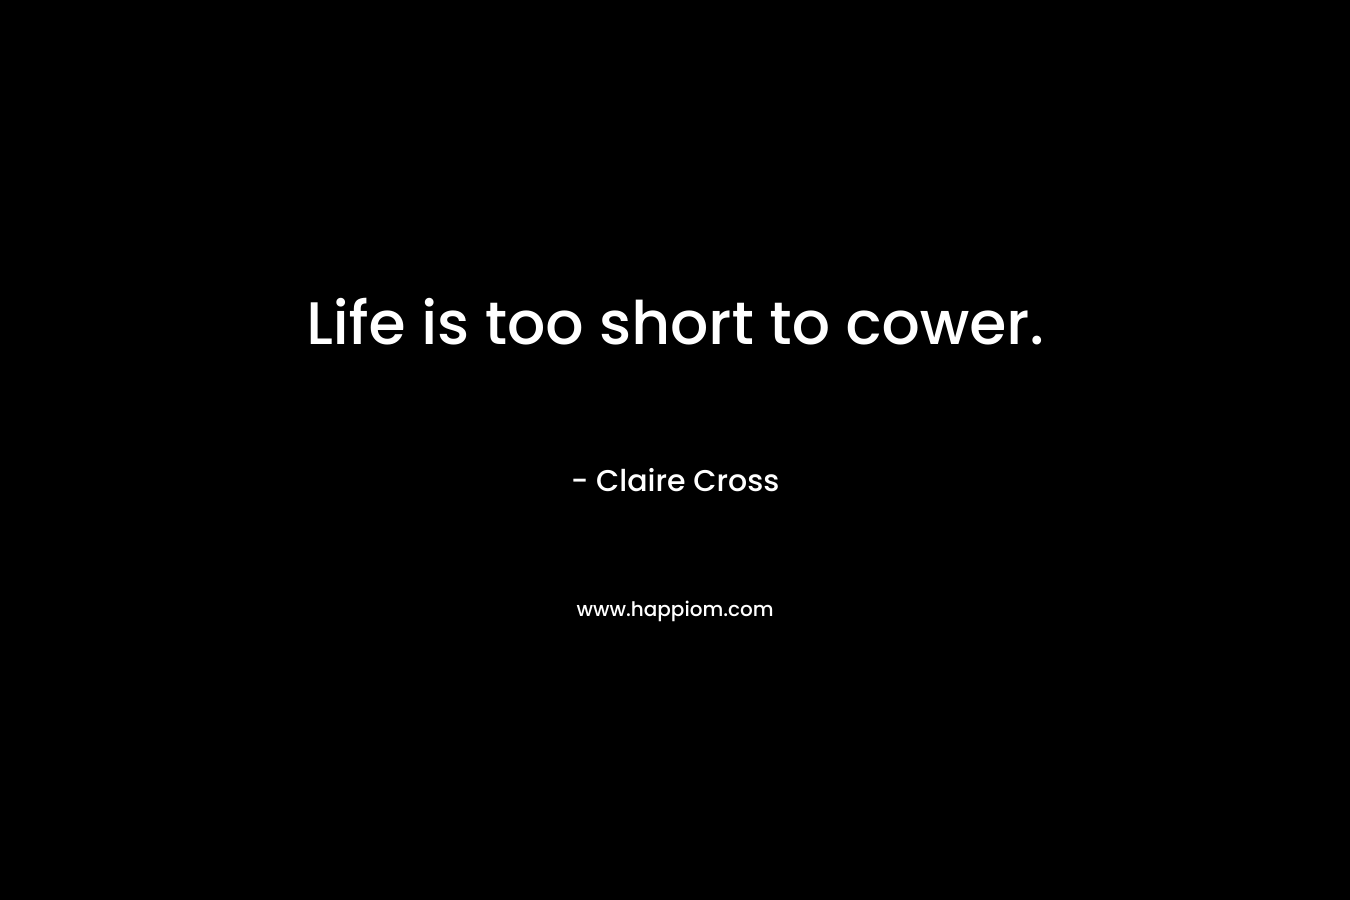 Life is too short to cower. – Claire Cross